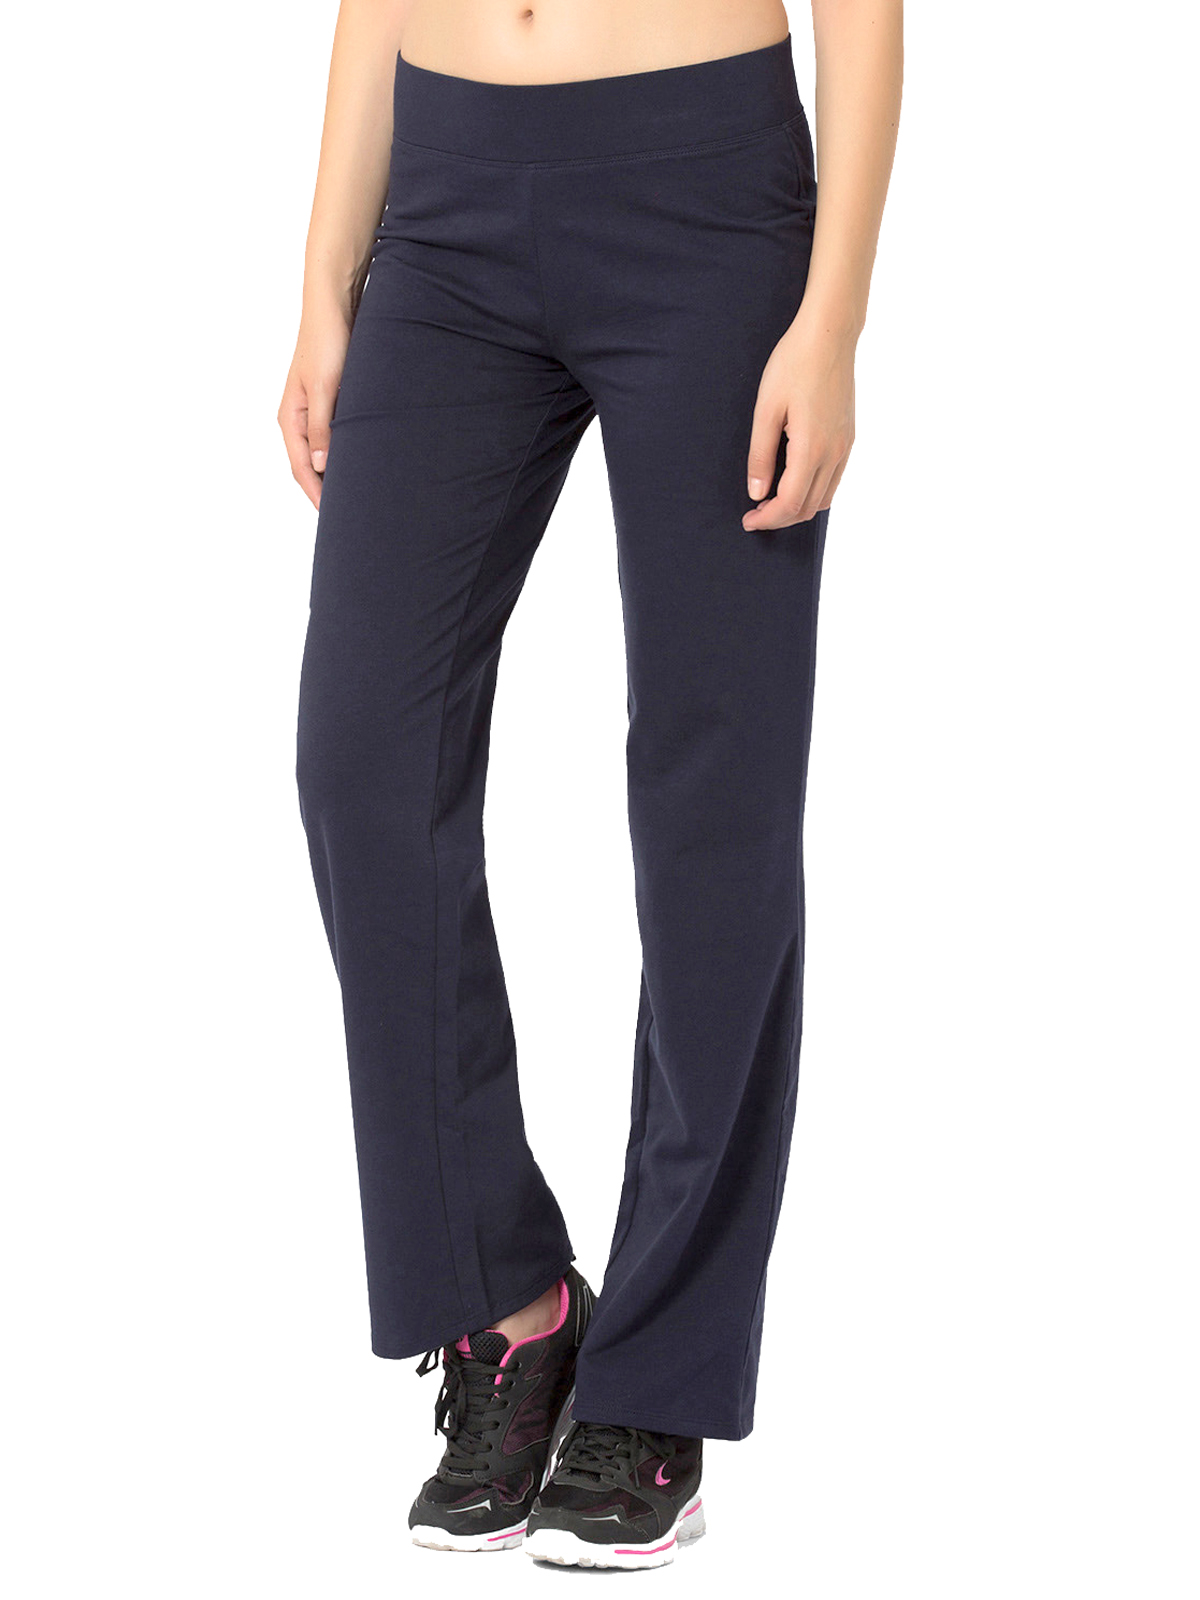 Marks and Spencer - - M&5 NAVY Stretch Cotton Knit Straight-Leg Jogger ...